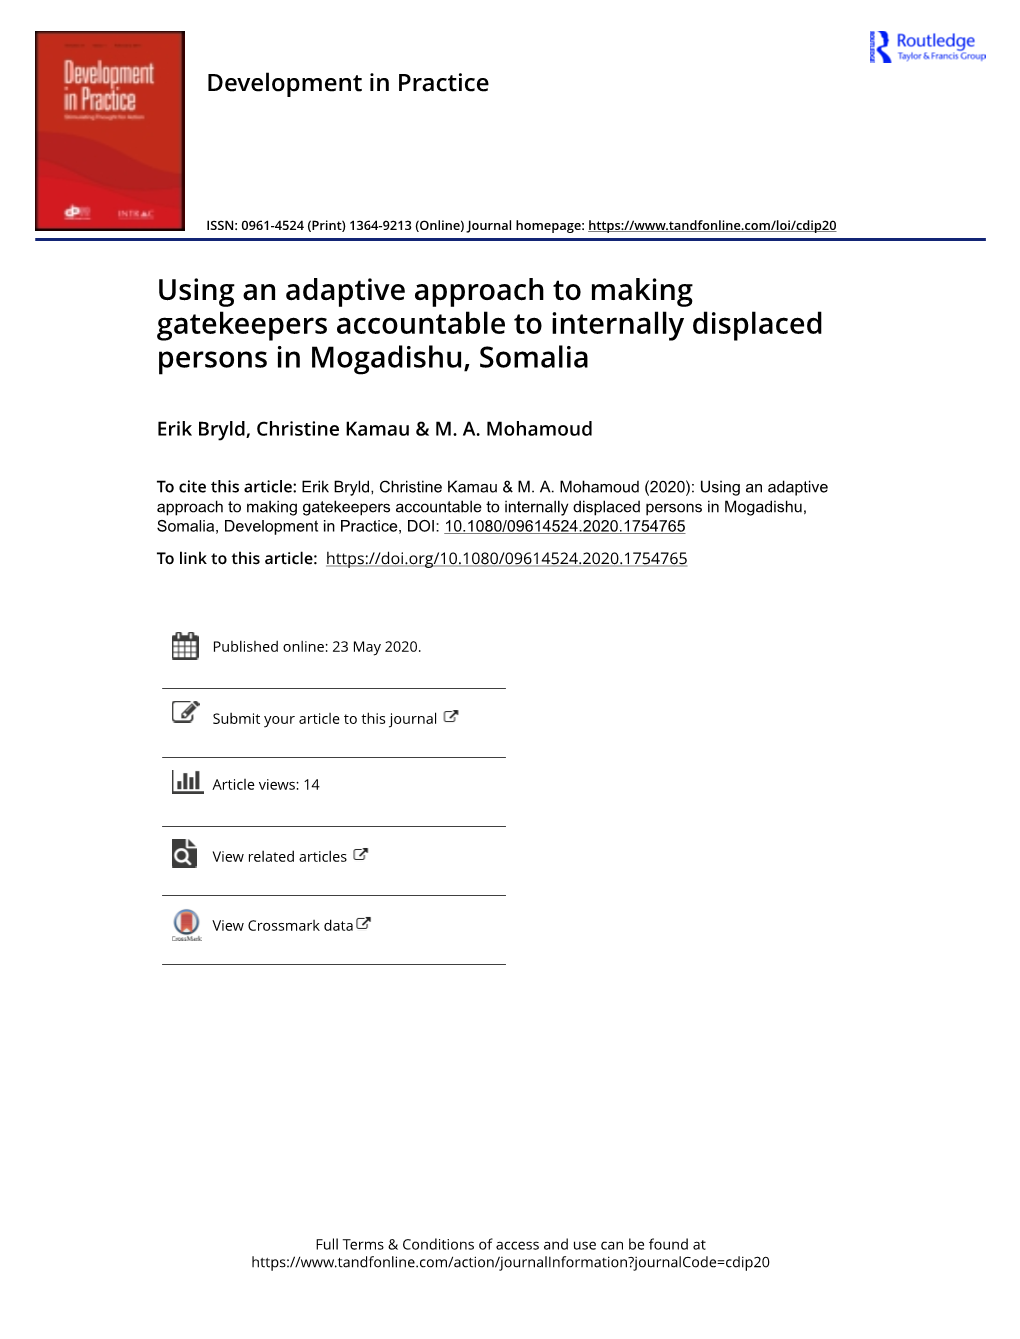 Using an Adaptive Approach to Making Gatekeepers Accountable to Internally Displaced Persons in Mogadishu, Somalia